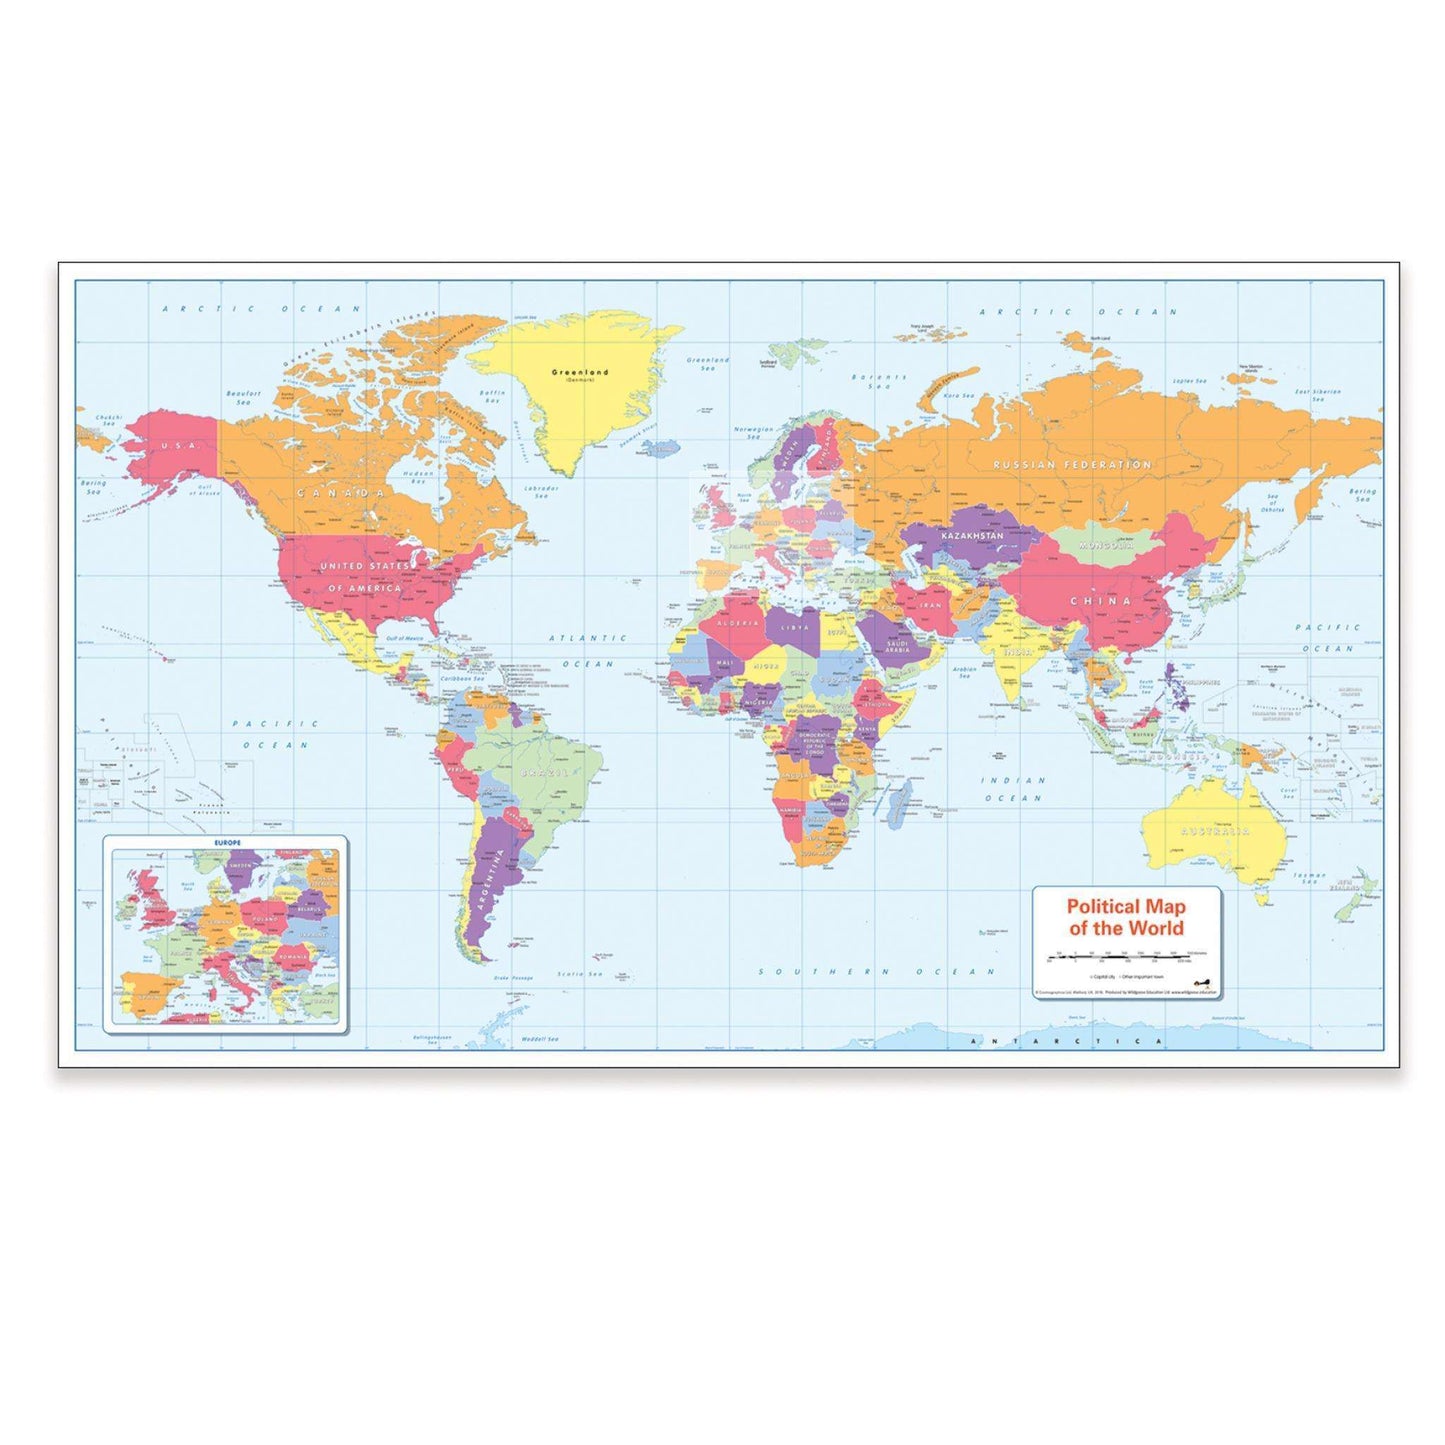 Colour Blind Friendly World Political Map:Primary Classroom Resources